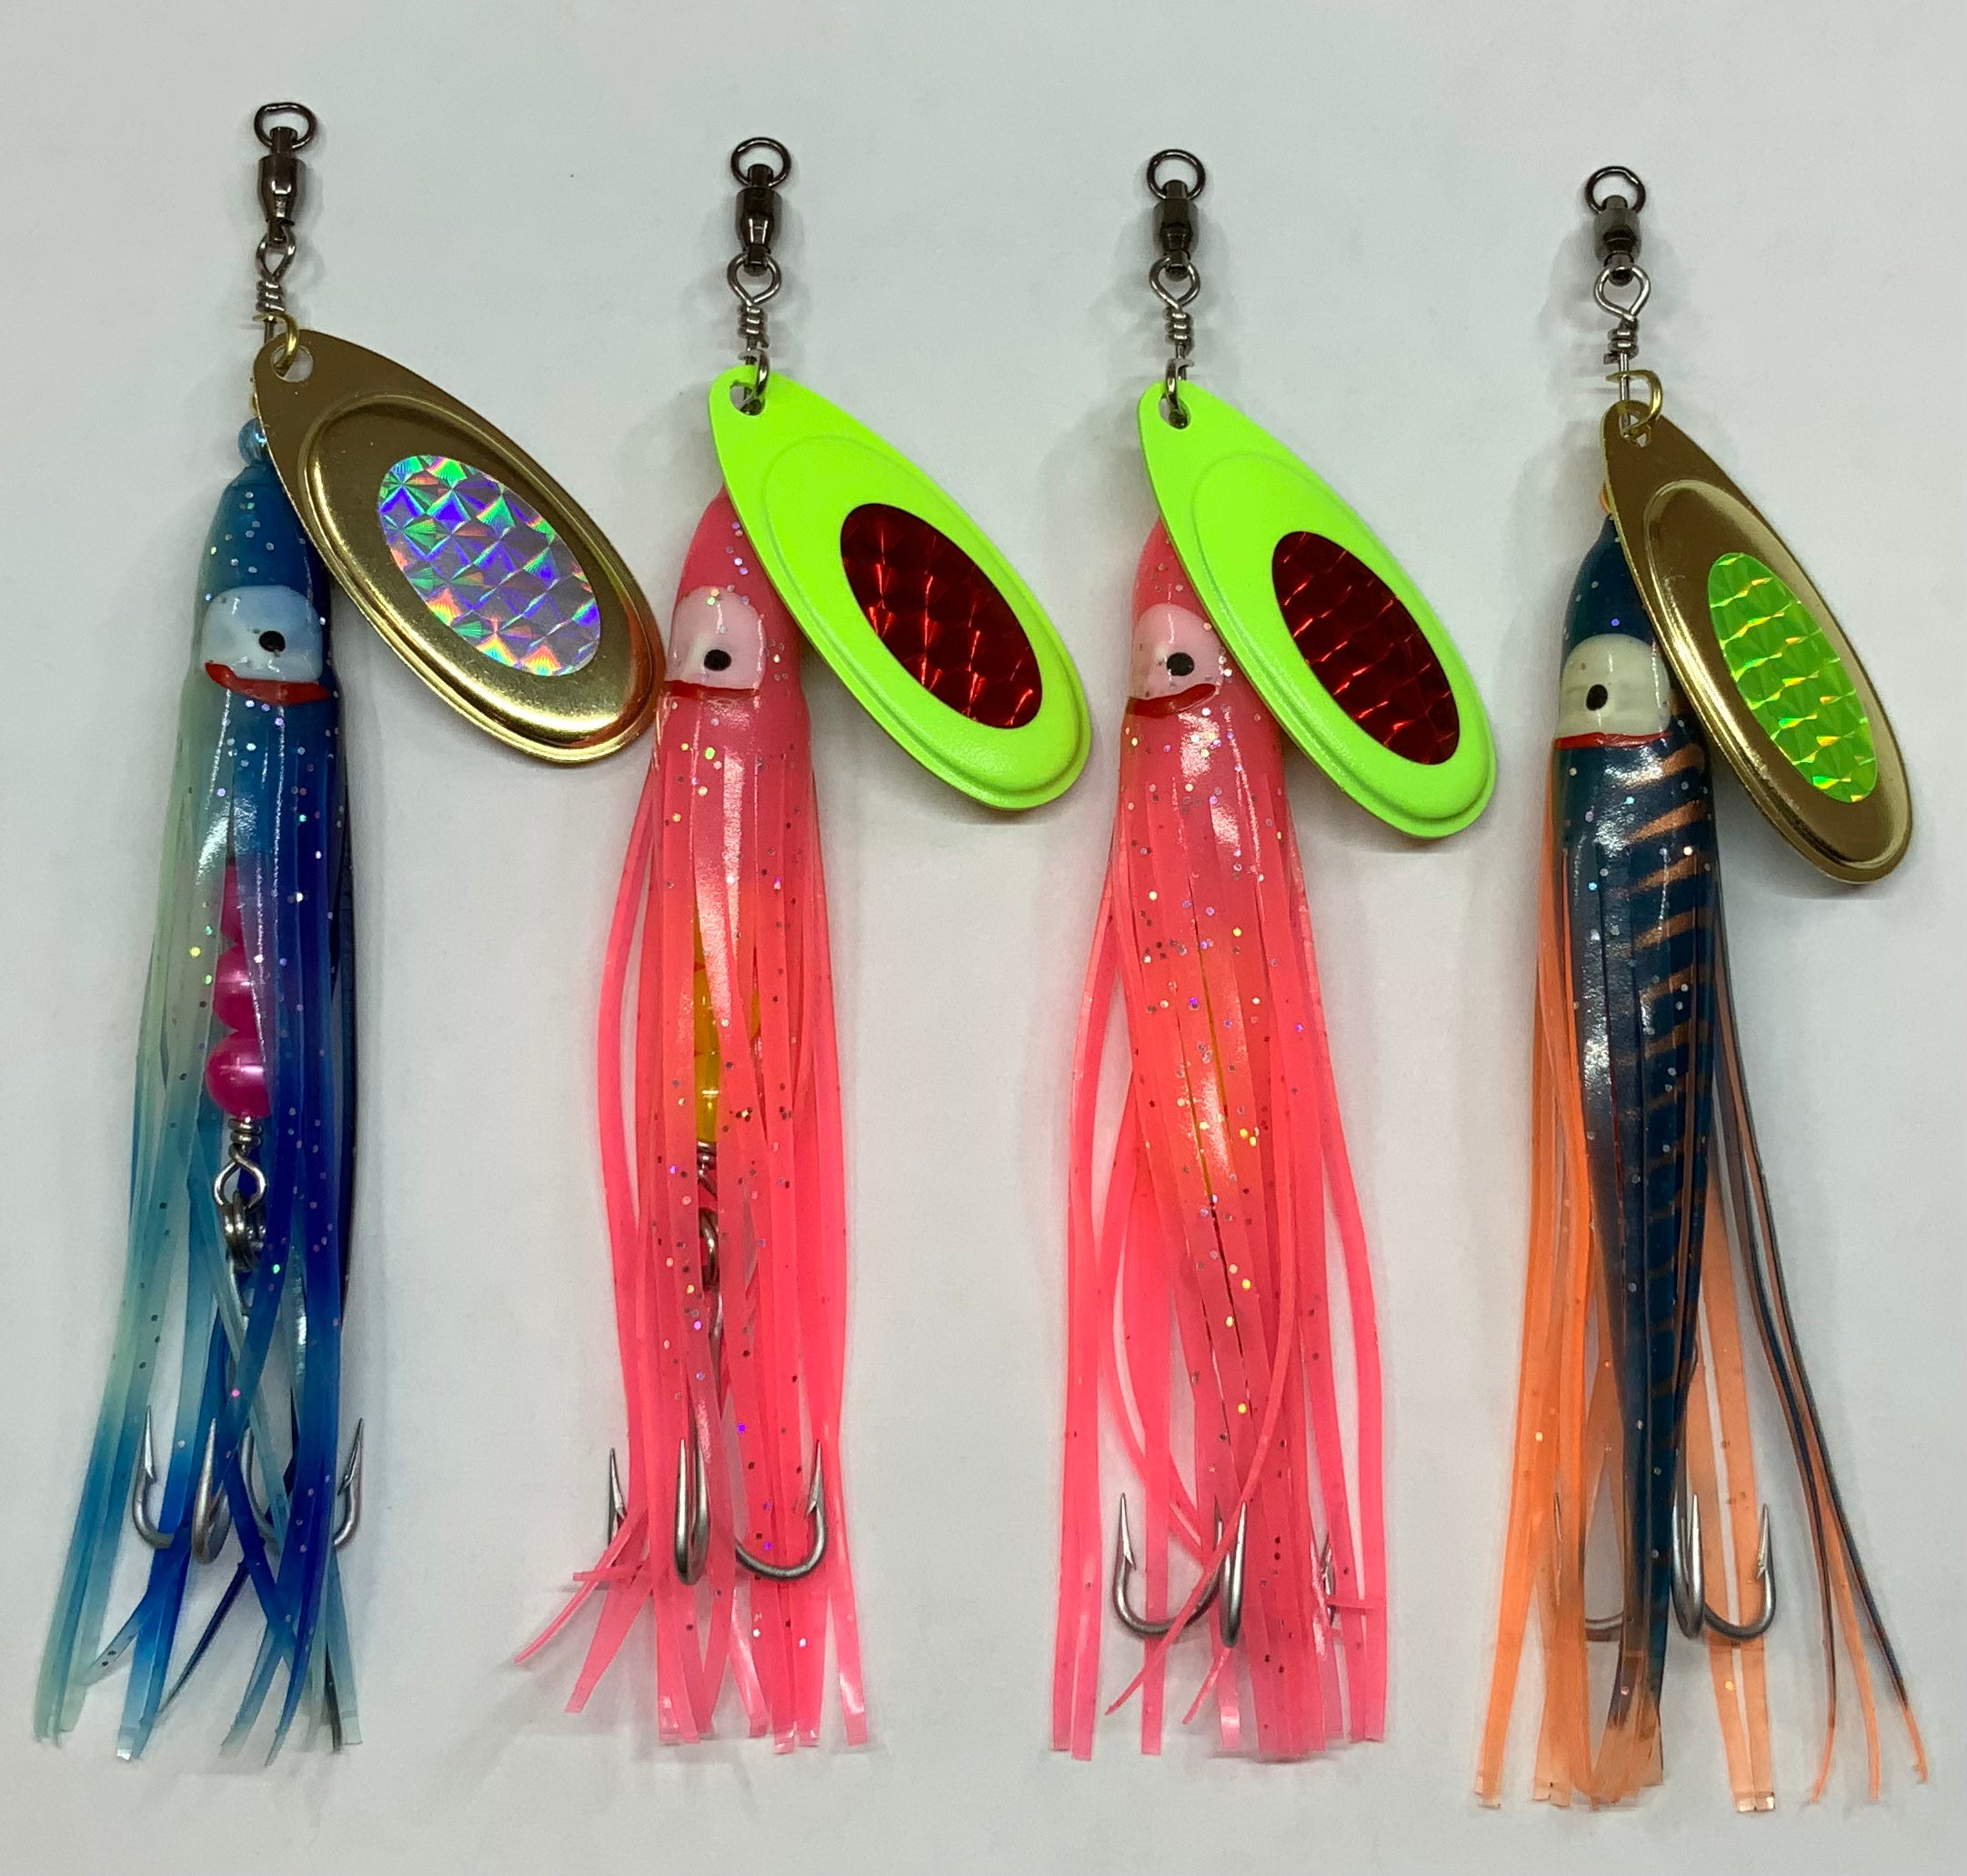 3/4oz Premium River Witches, 4 Pack, 42.25$, Salmon Lures, Spin-X Desi